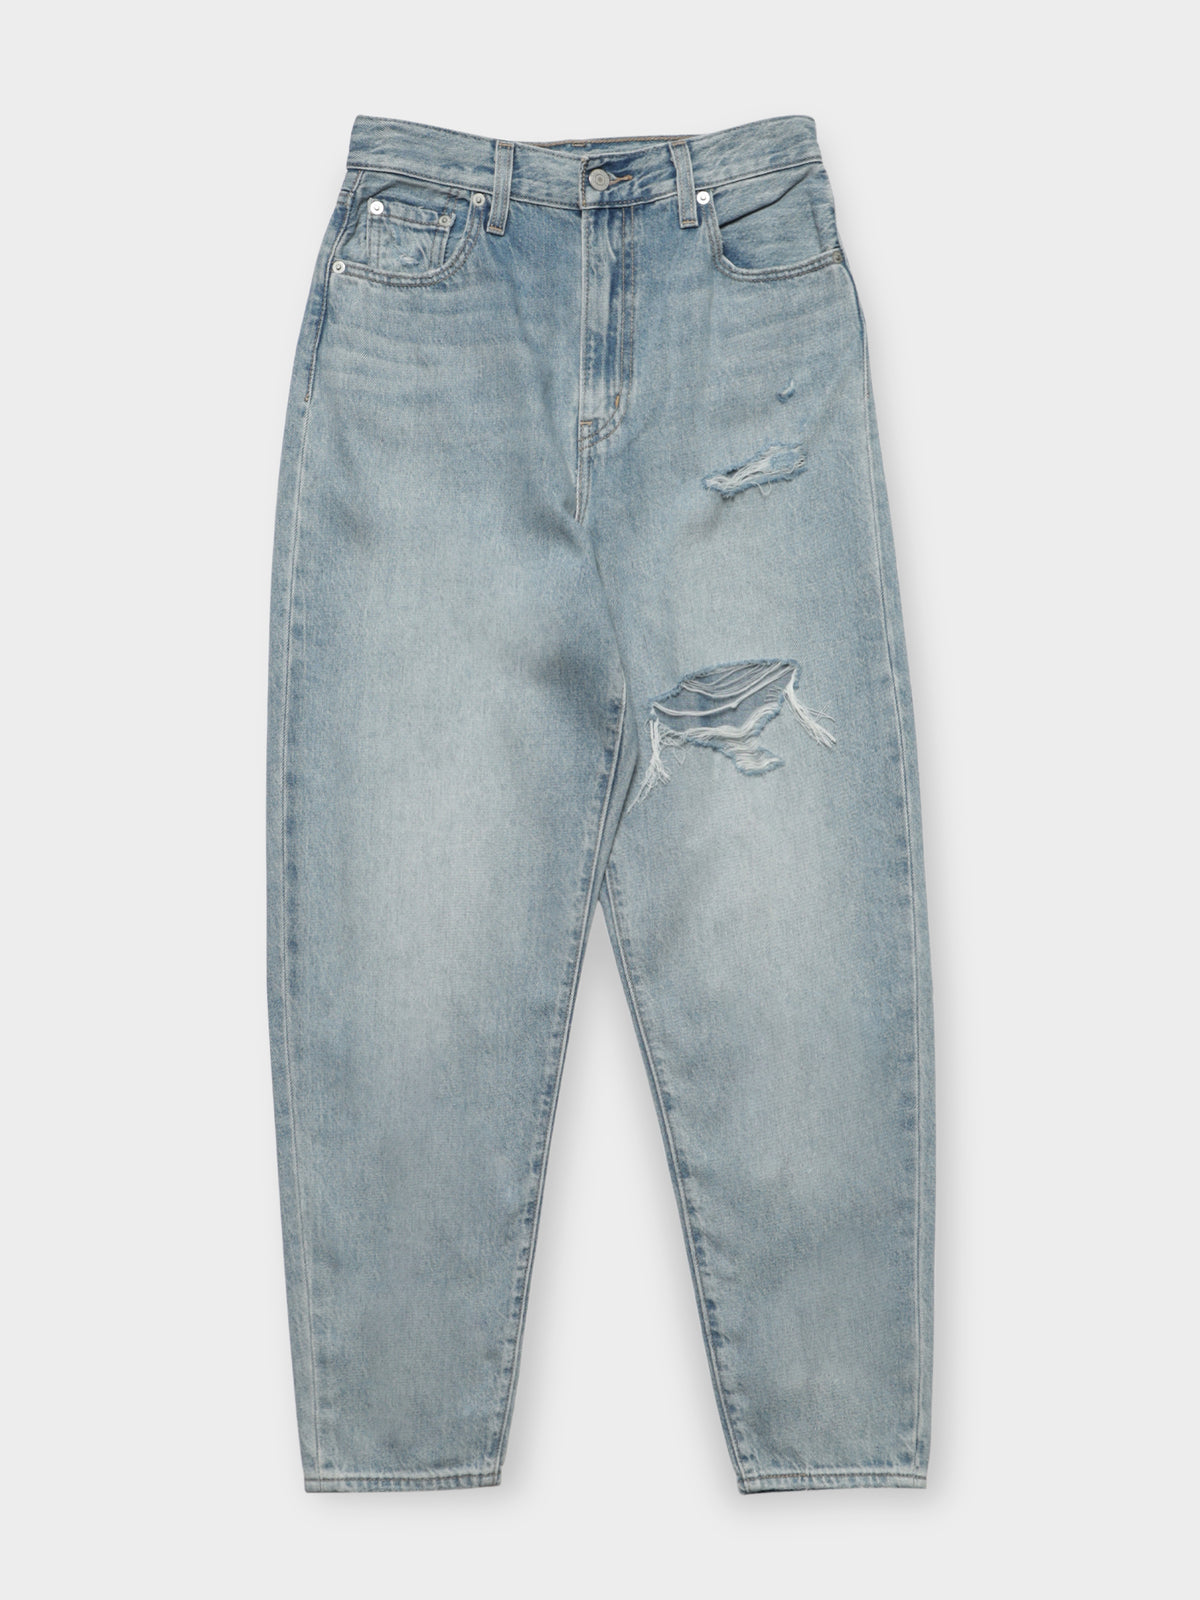 High Loose Tapered Jeans in Here to Stay Blue